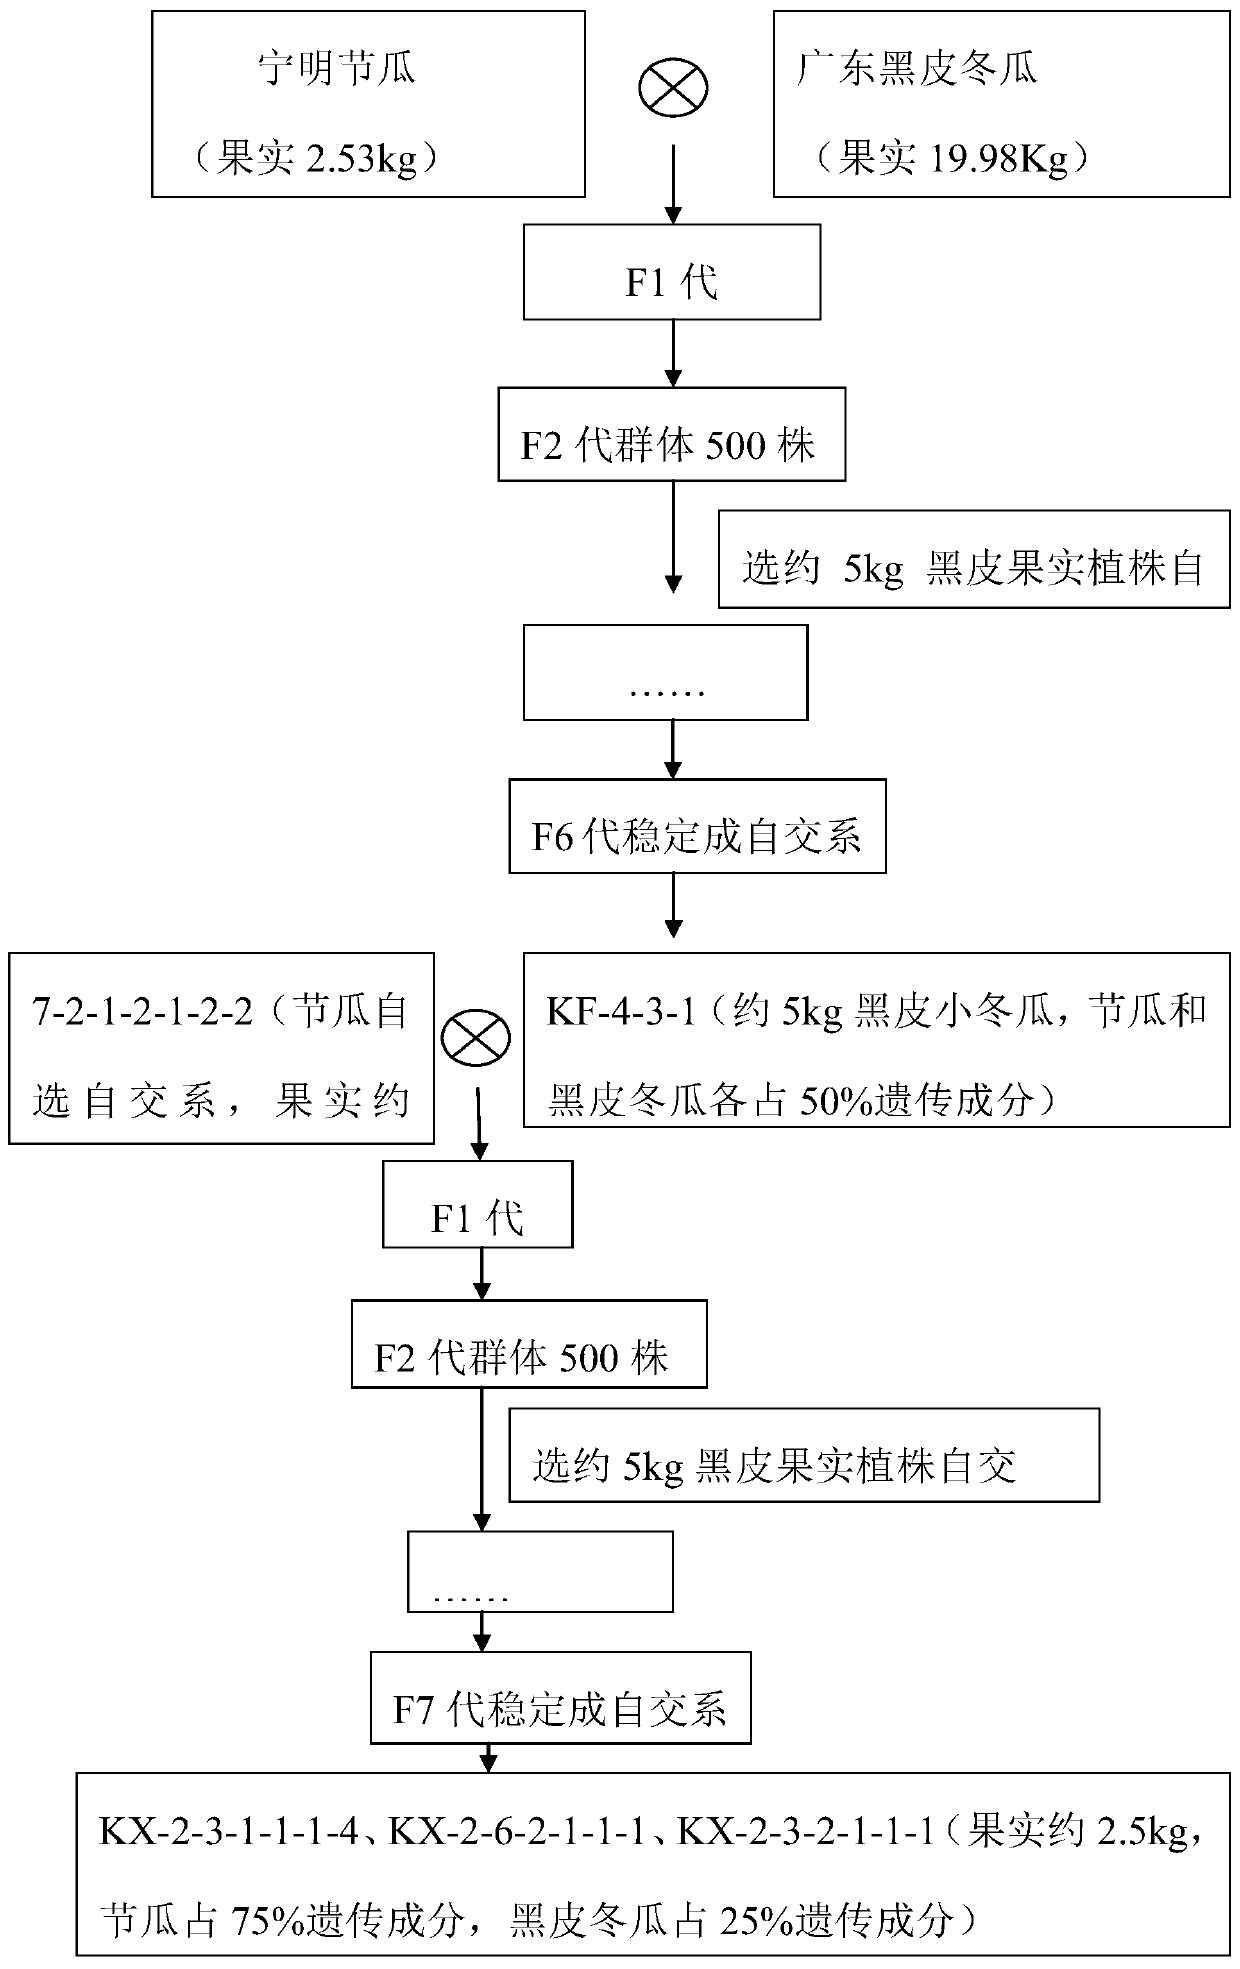 A secondary pedigree selection method for winter melon peel black and fruit size